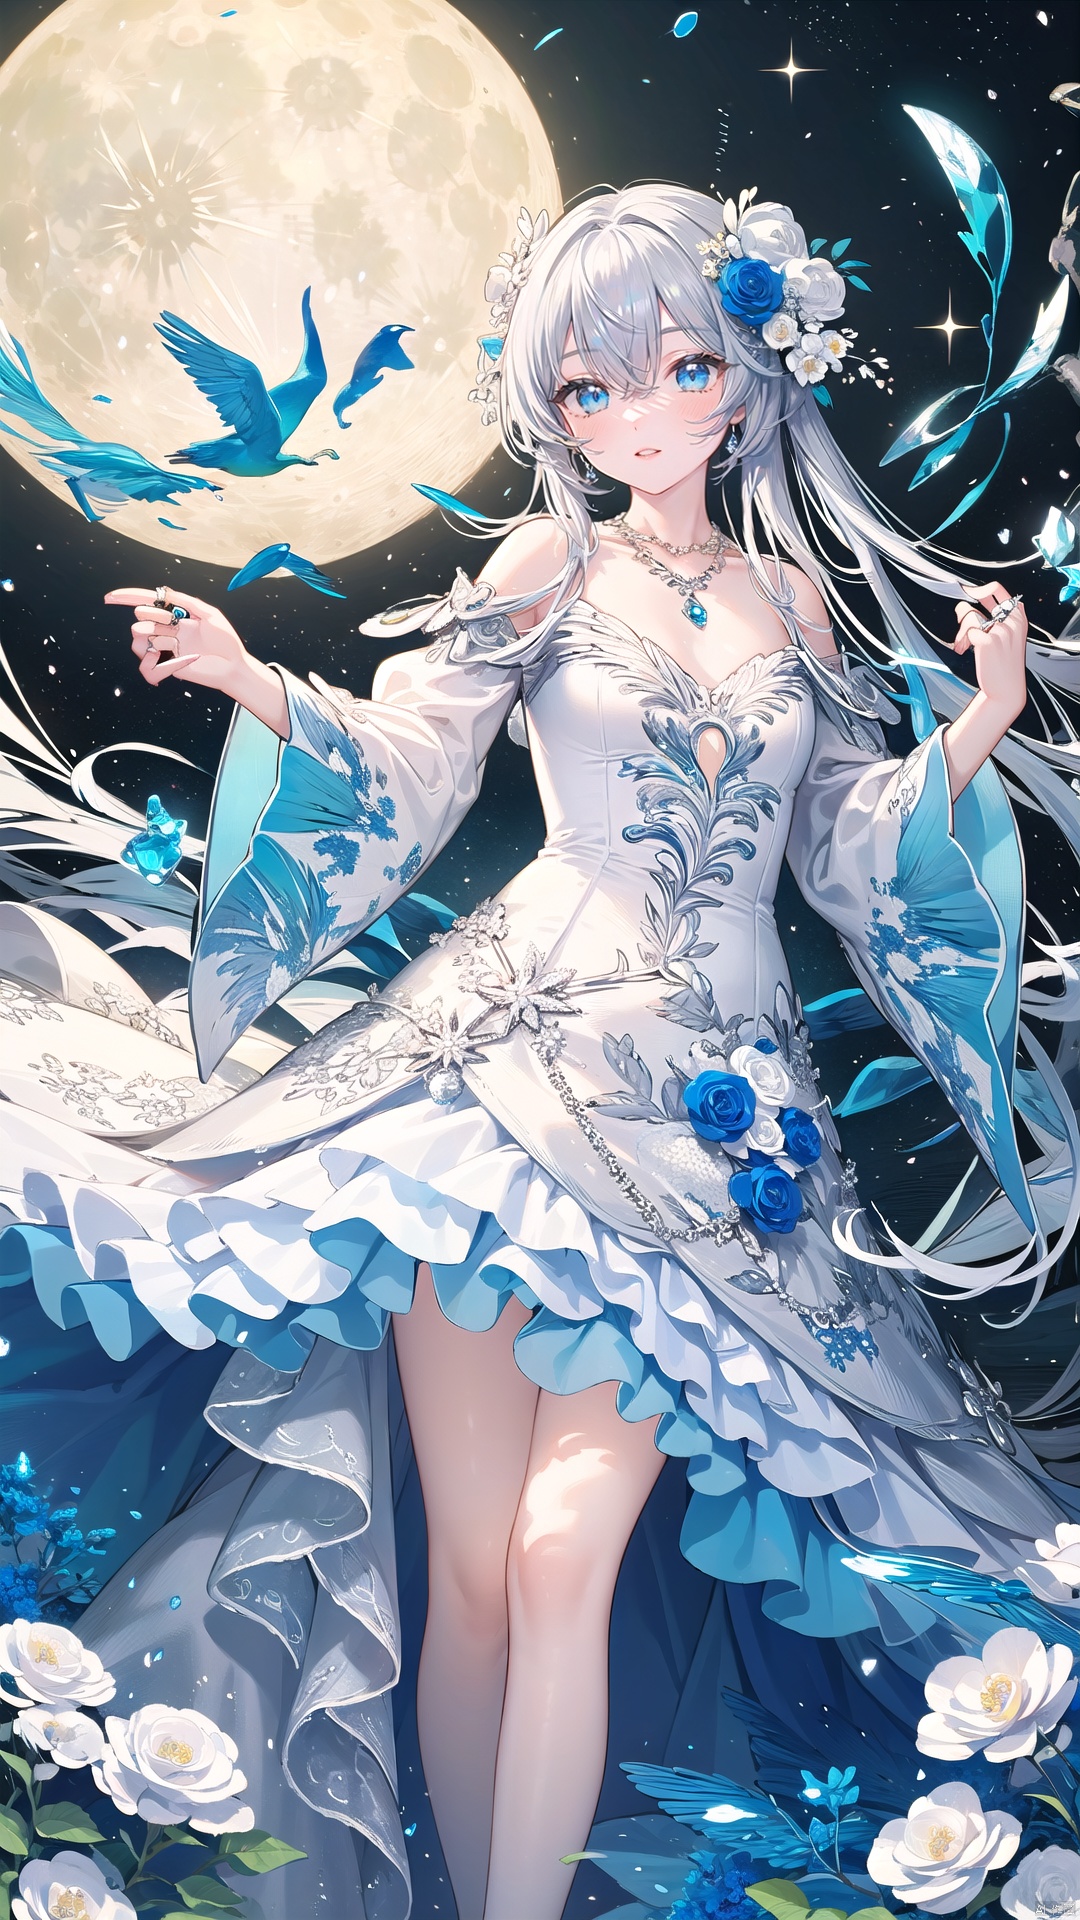  1 girl, white field, flowers, solo, blue eyes, looking at the audience, white long hair, white flowers, wreaths, light lips, dress, crystal, moon, ring, bangs, wide sleeves, necklace, new moon, glow, white lace dress, walking, hair flower, planet, hair between eyes,

